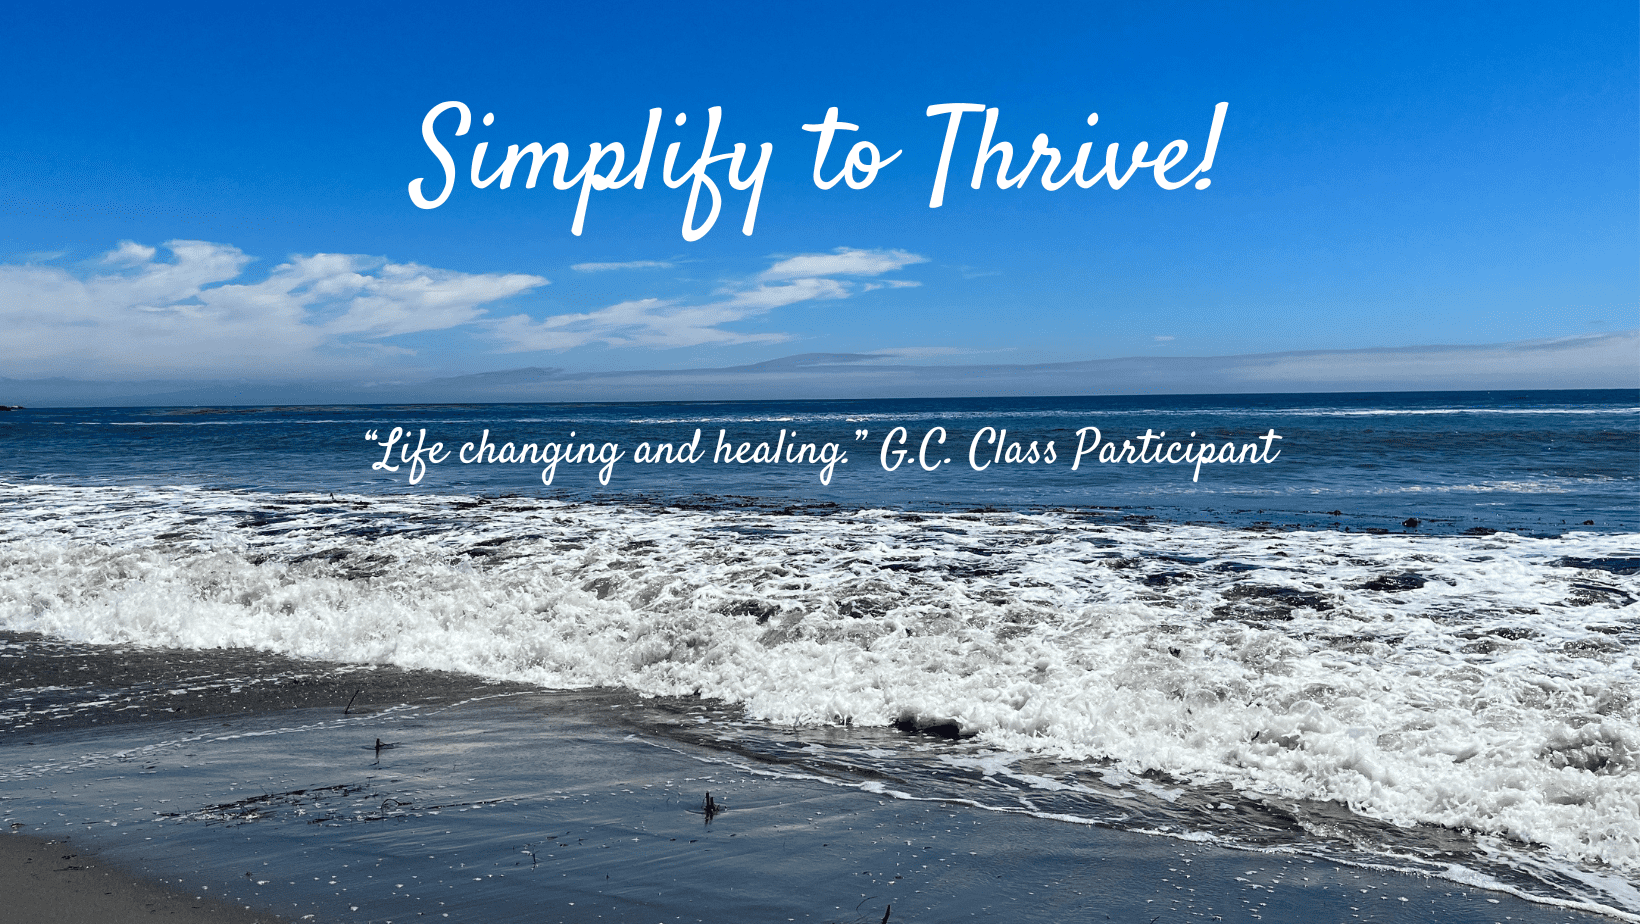 Simplify to thrive